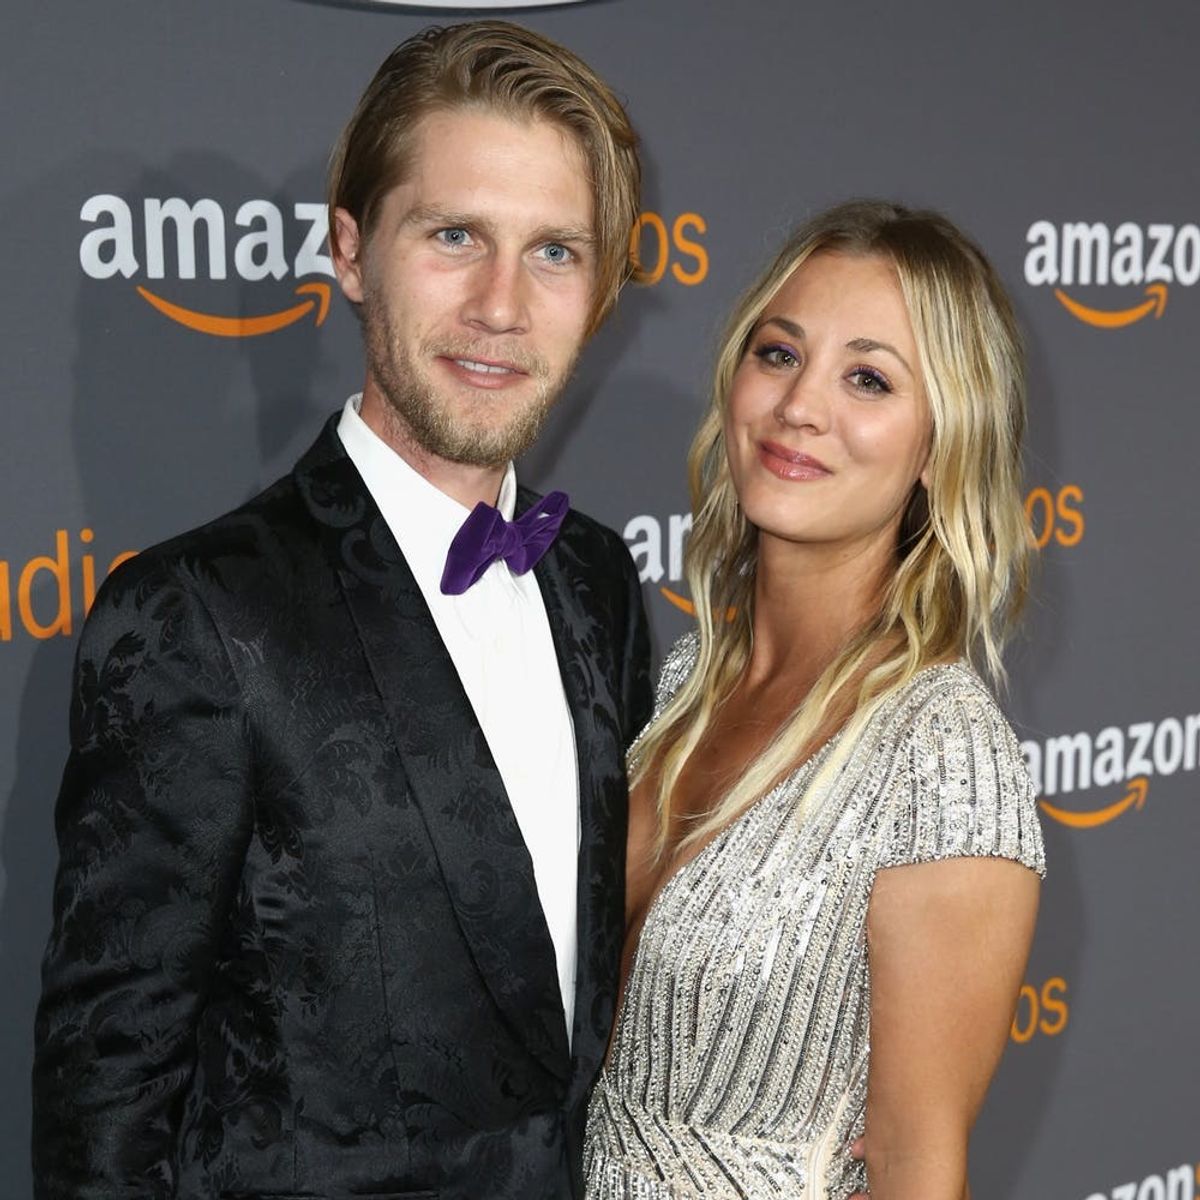 Kaley Cuoco Is Engaged to Karl Cook! See Her Emotional Reaction to the Proposal